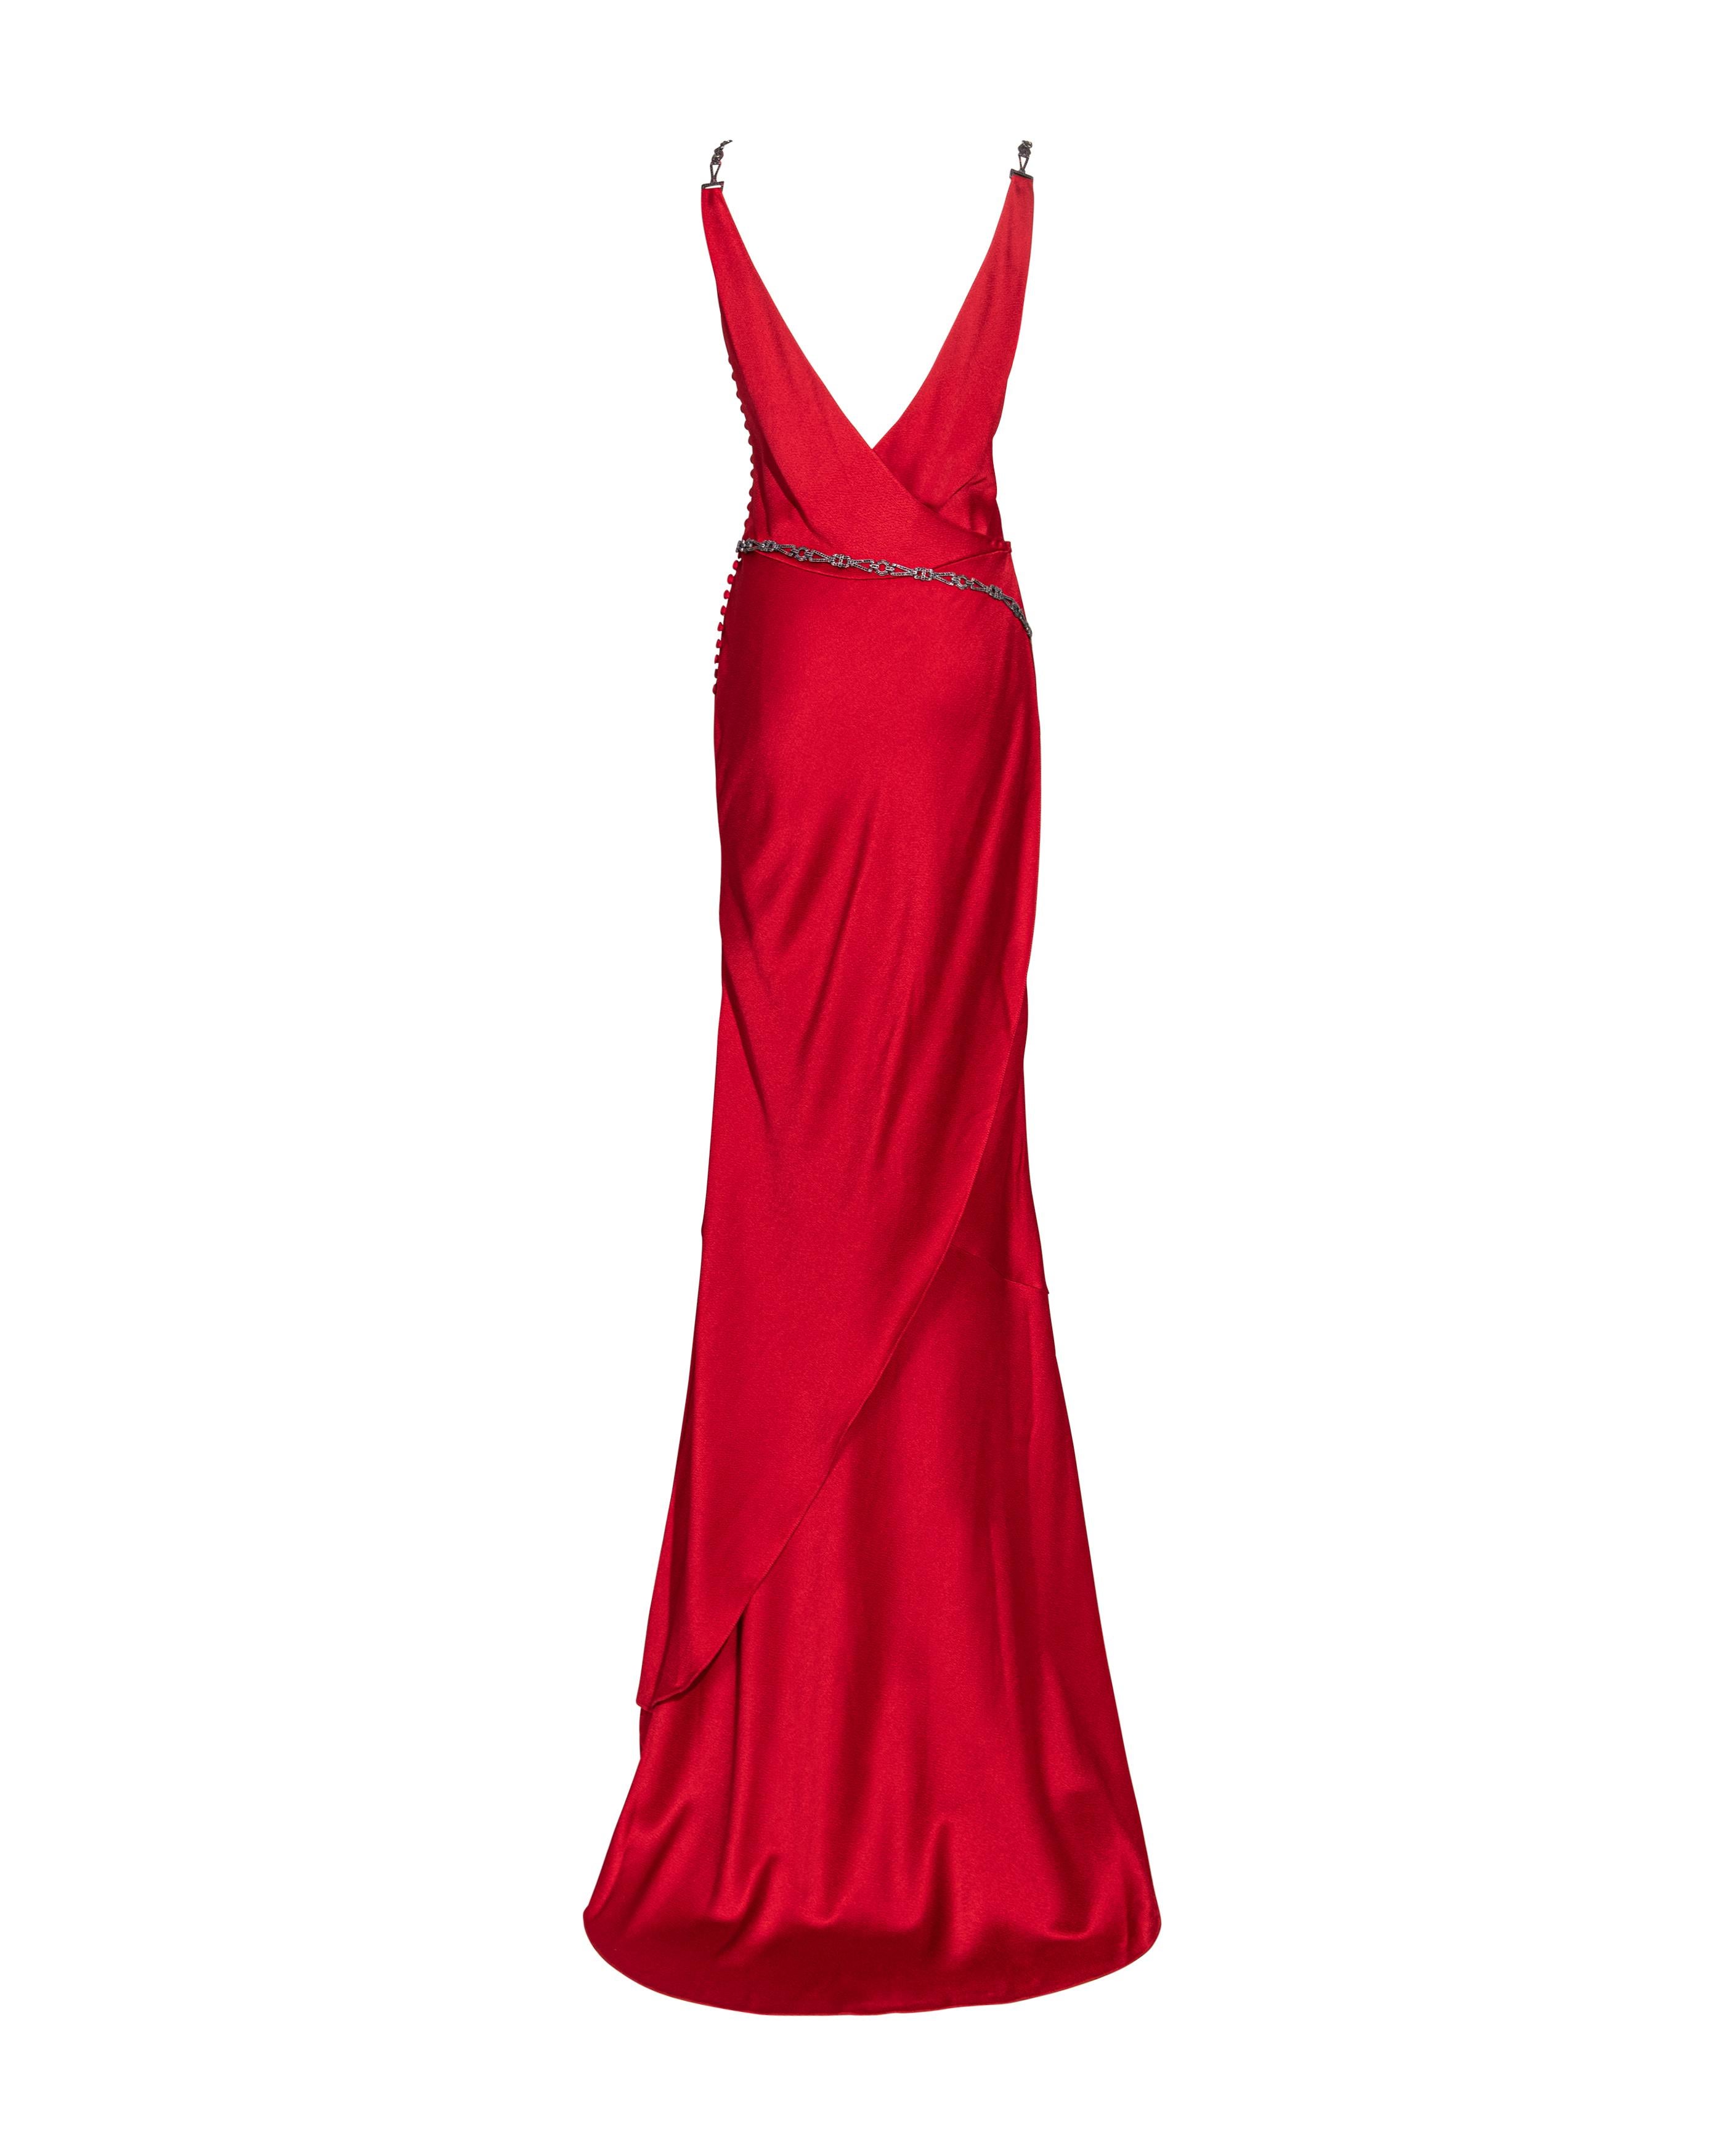 Women's S/S 2000 Christian Dior by John Galliano Red Bias Cut Gown with Jeweled Belt